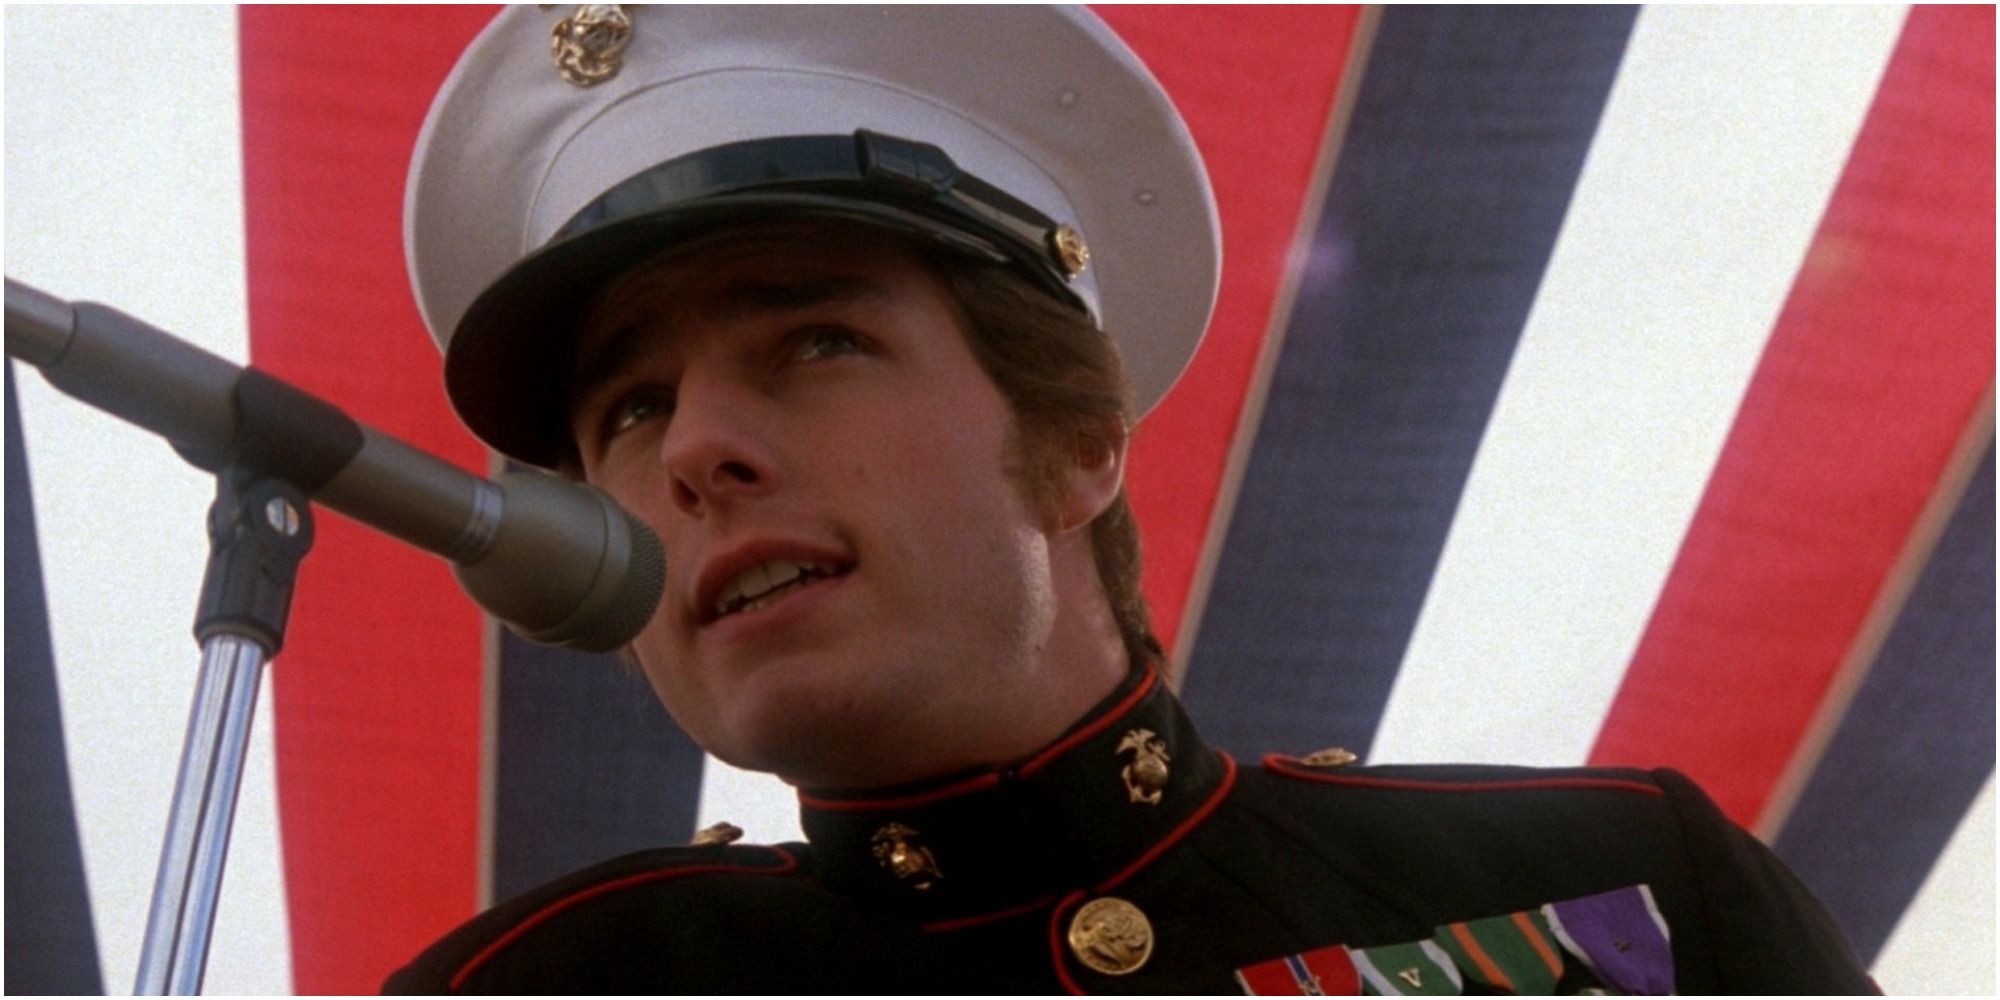 Tom Cruise in Born on the Fourth of July